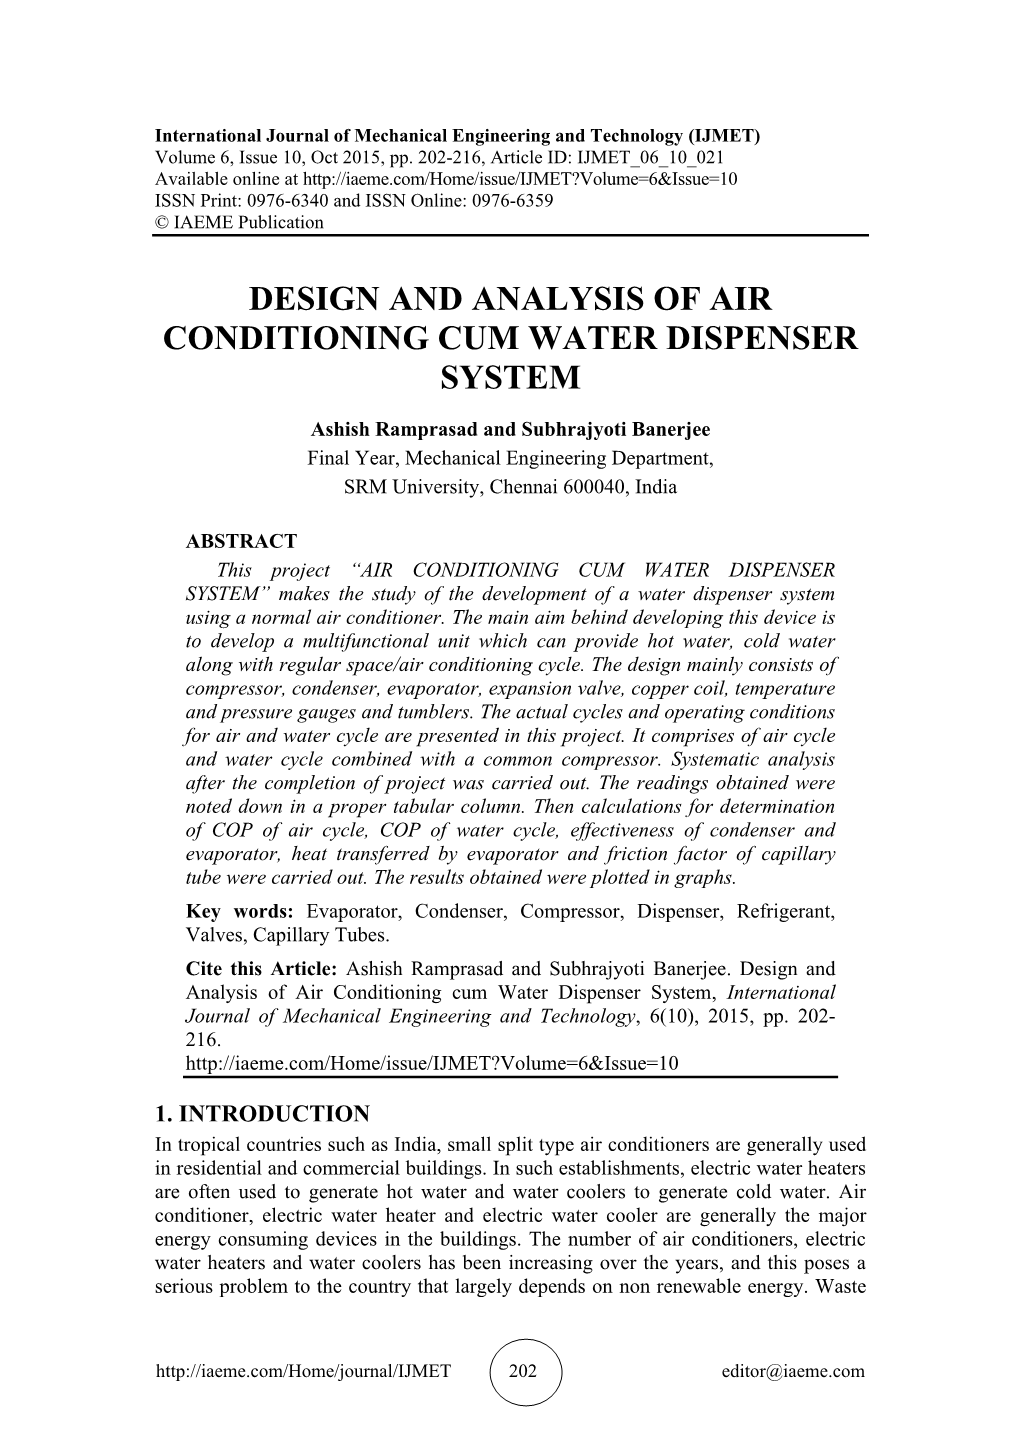 Design and Analysis of Air Conditioning Cum Water Dispenser System